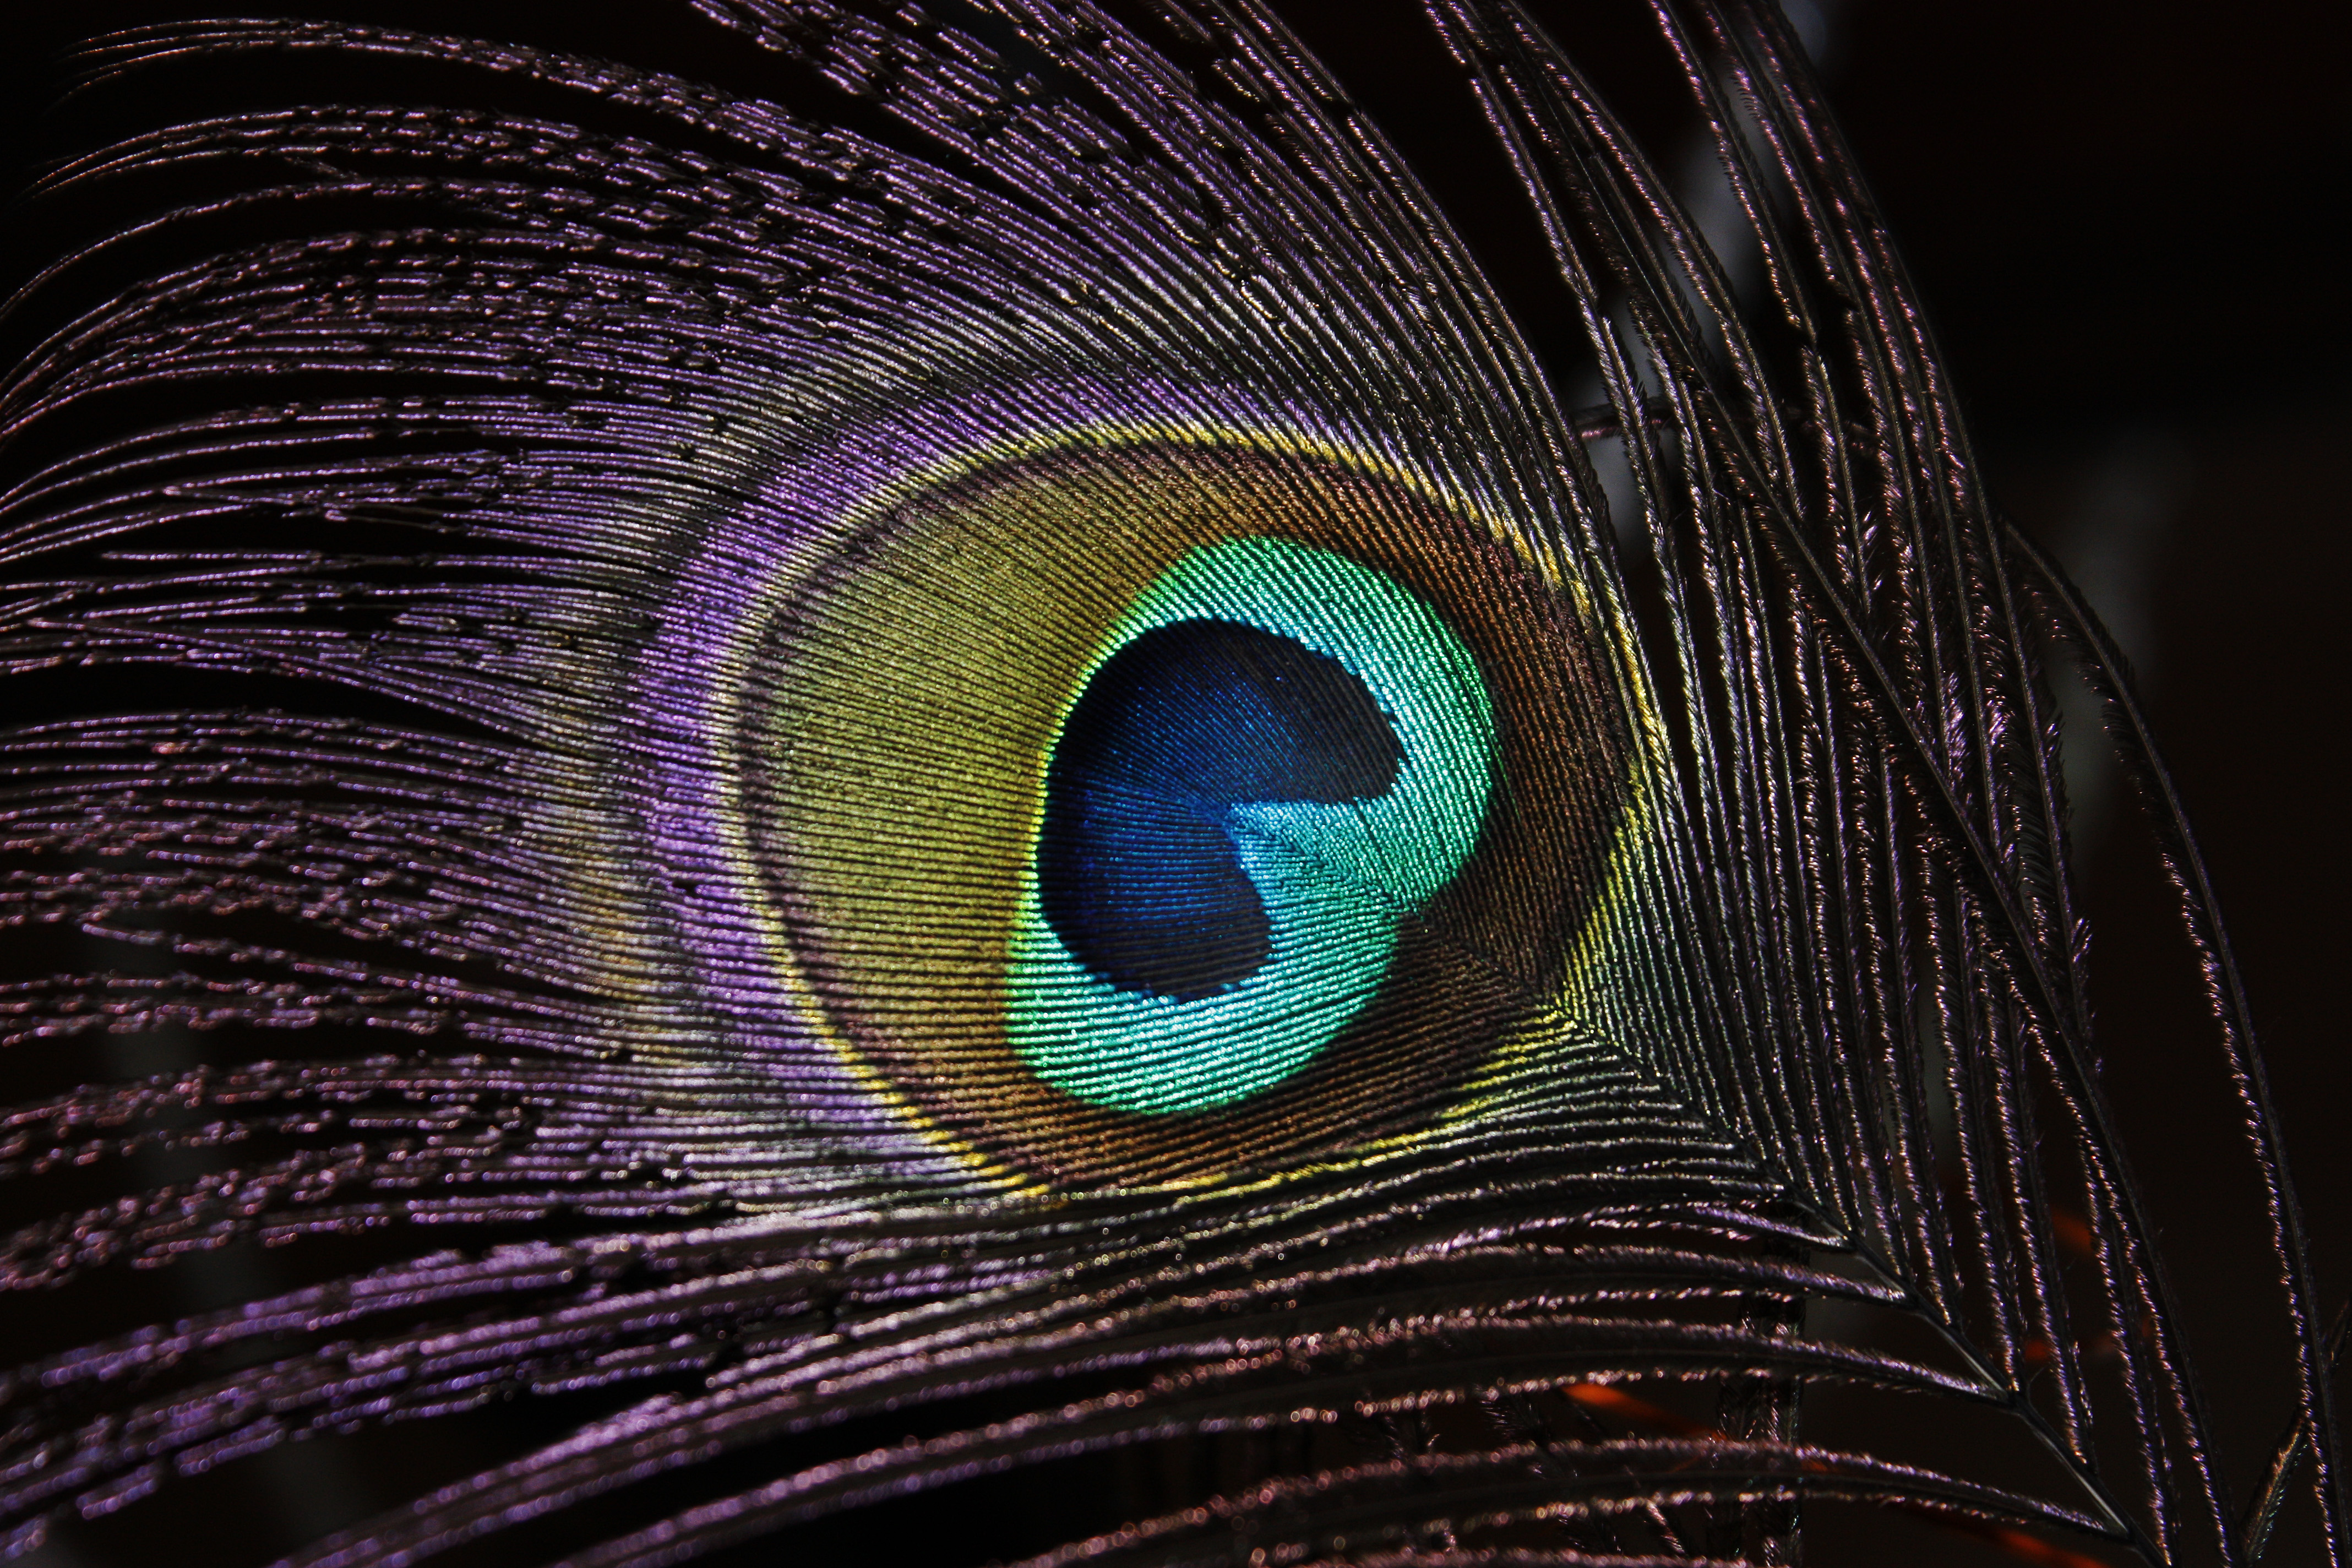 Peacock Feather | Samples Photography